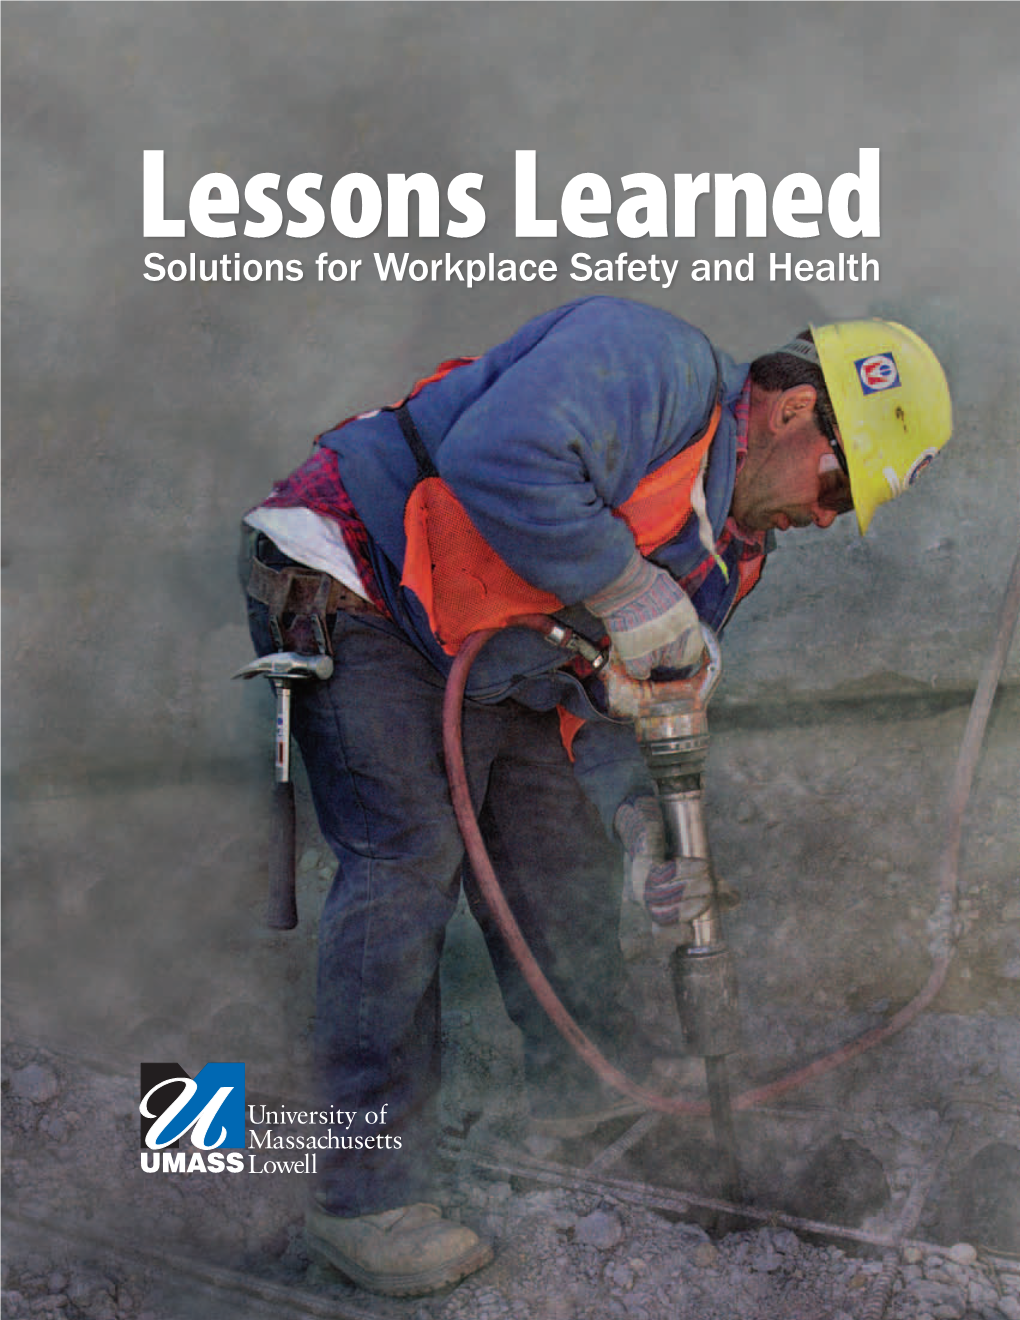 Lessons Learned, Solutions for Workplace Safety and Health